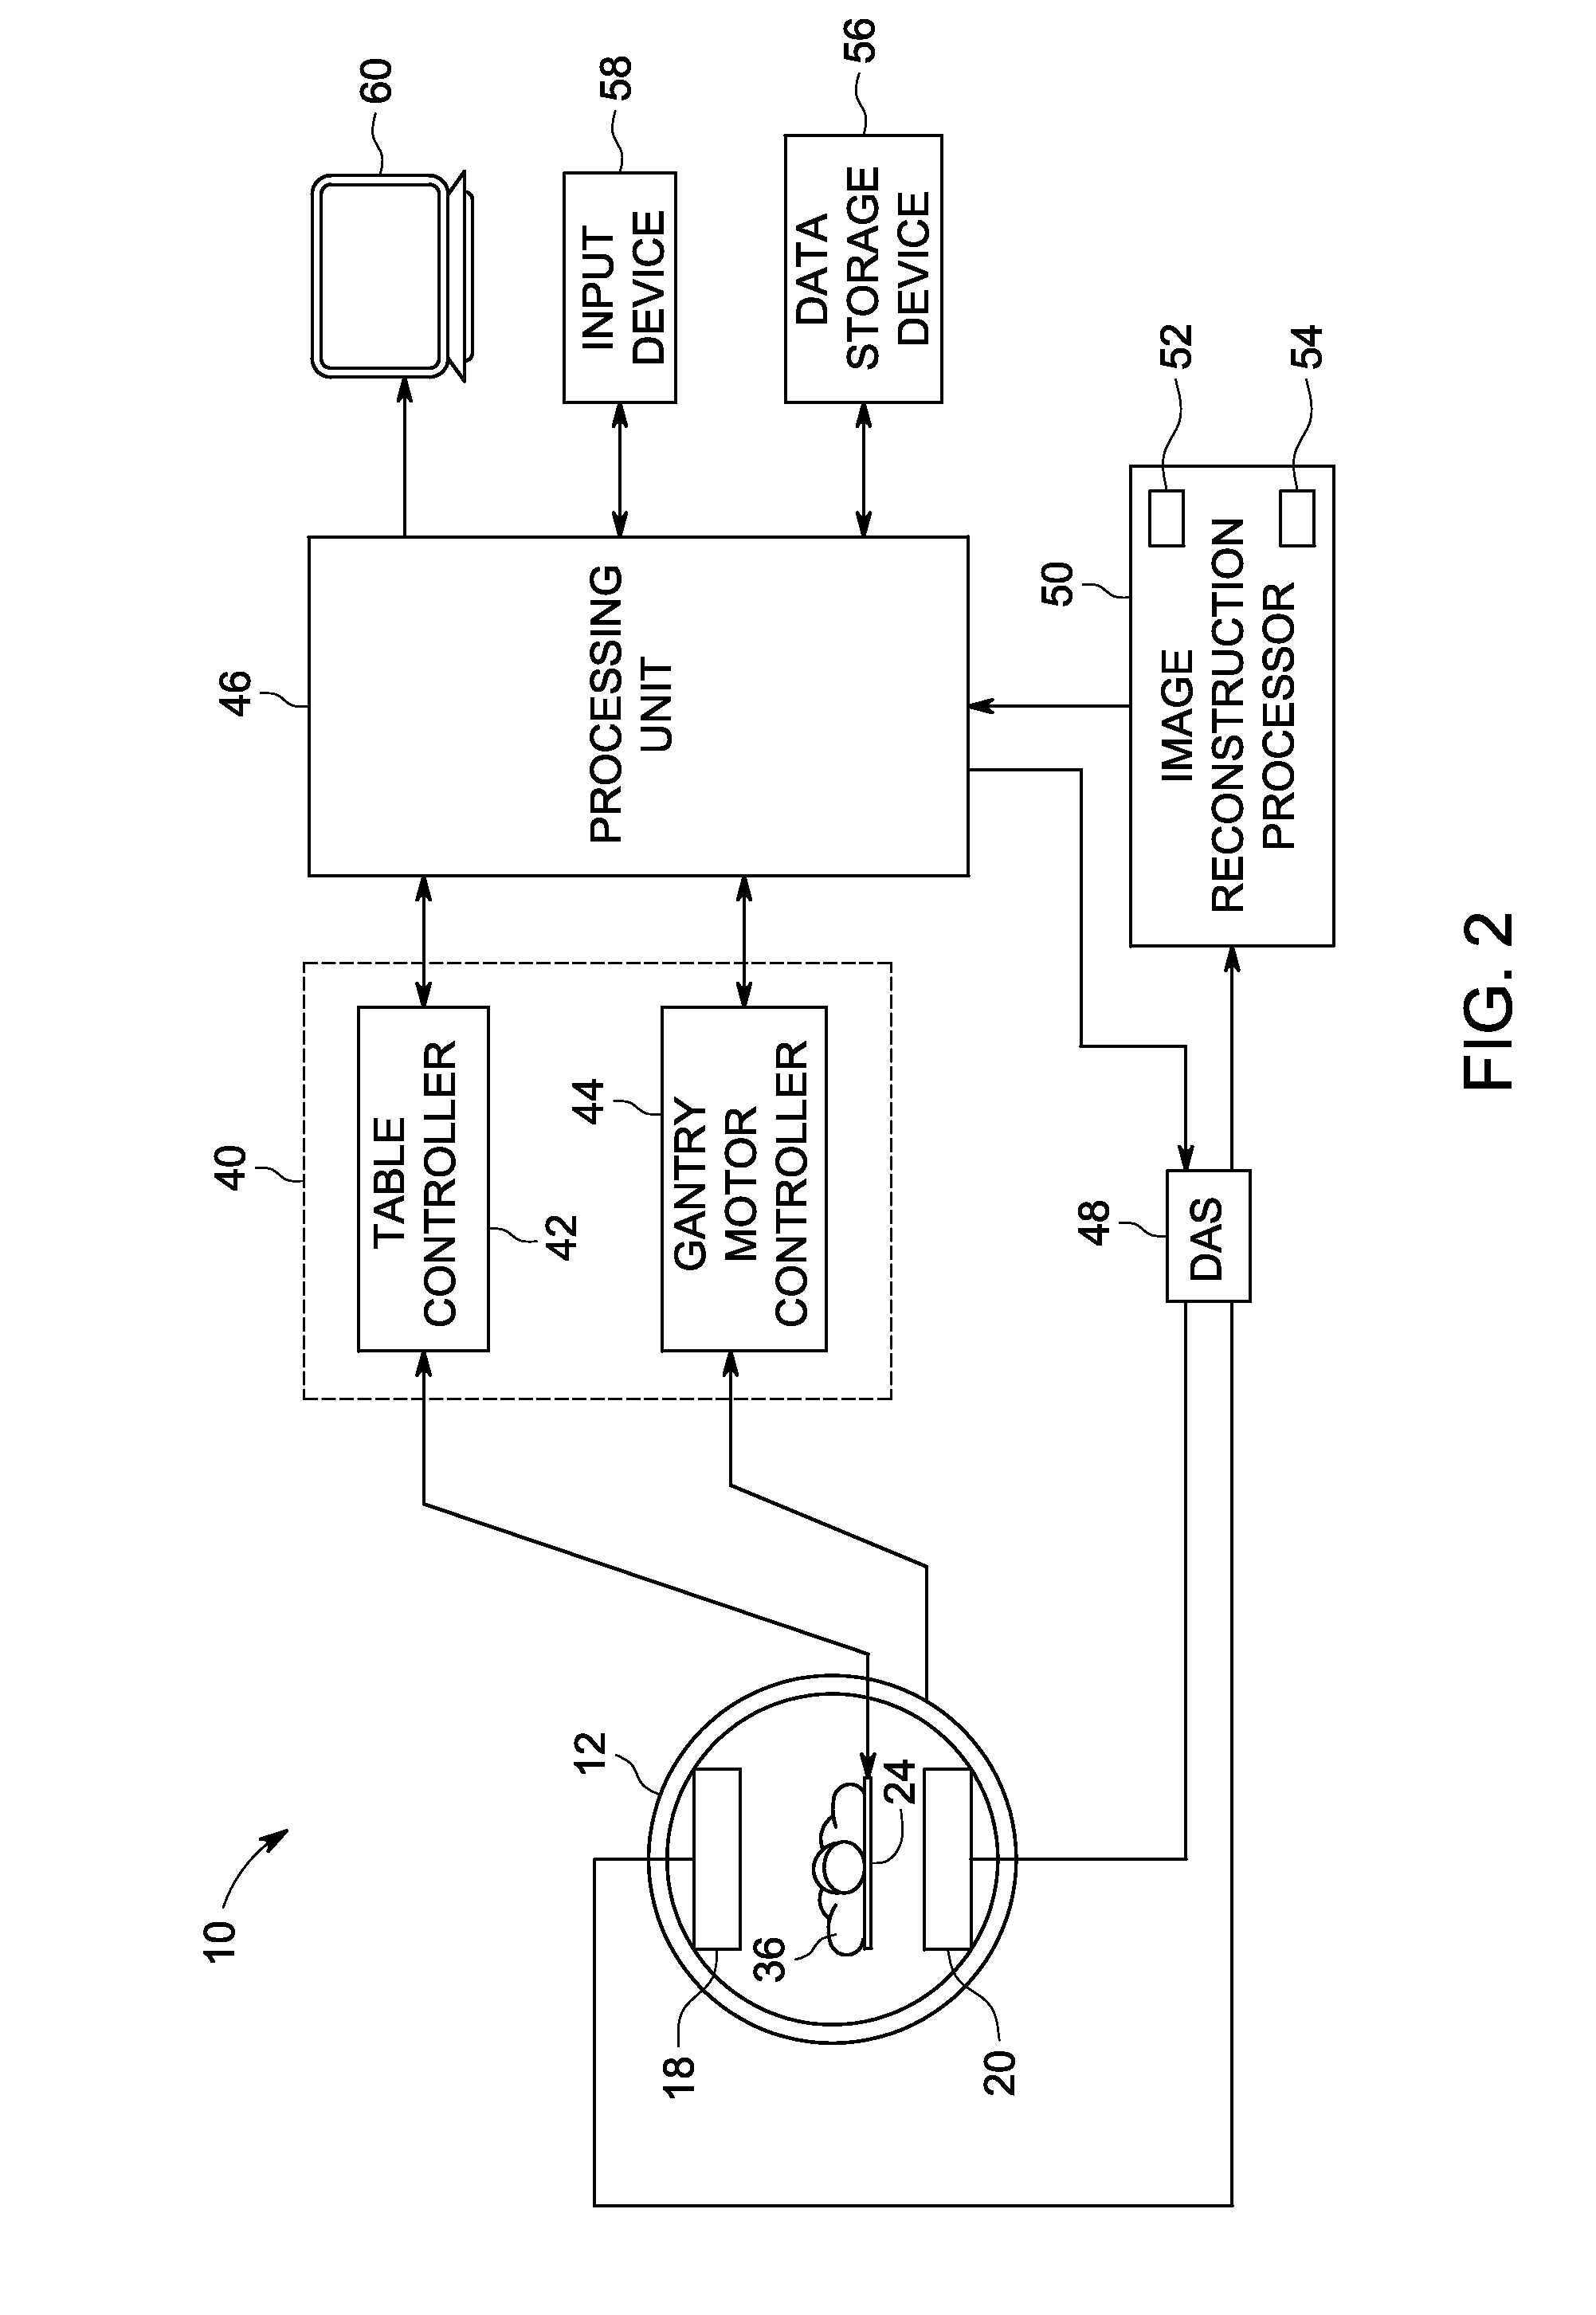 Apparatus and methods for generating a planar image